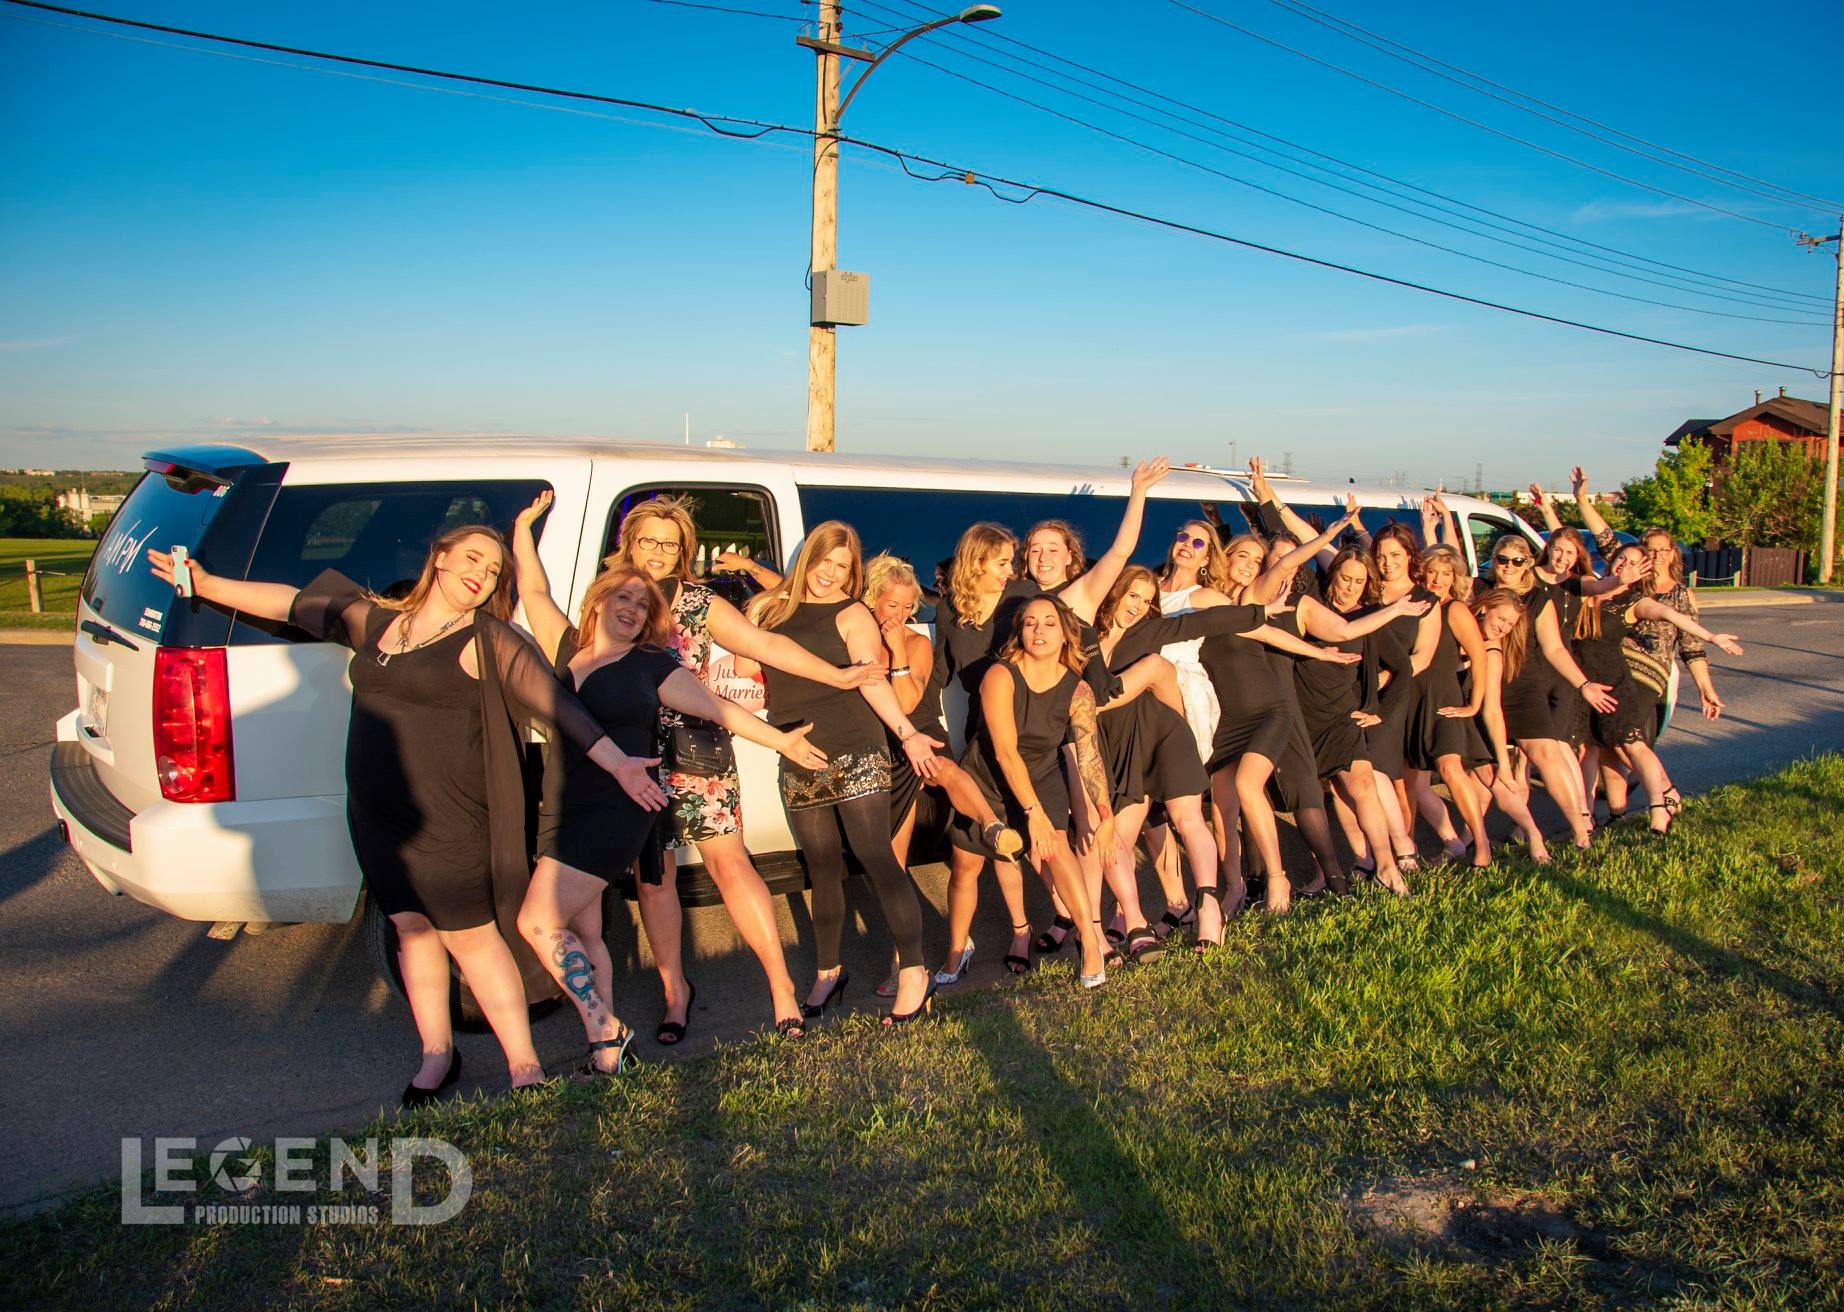 Can 20 People Fit in a Limo?